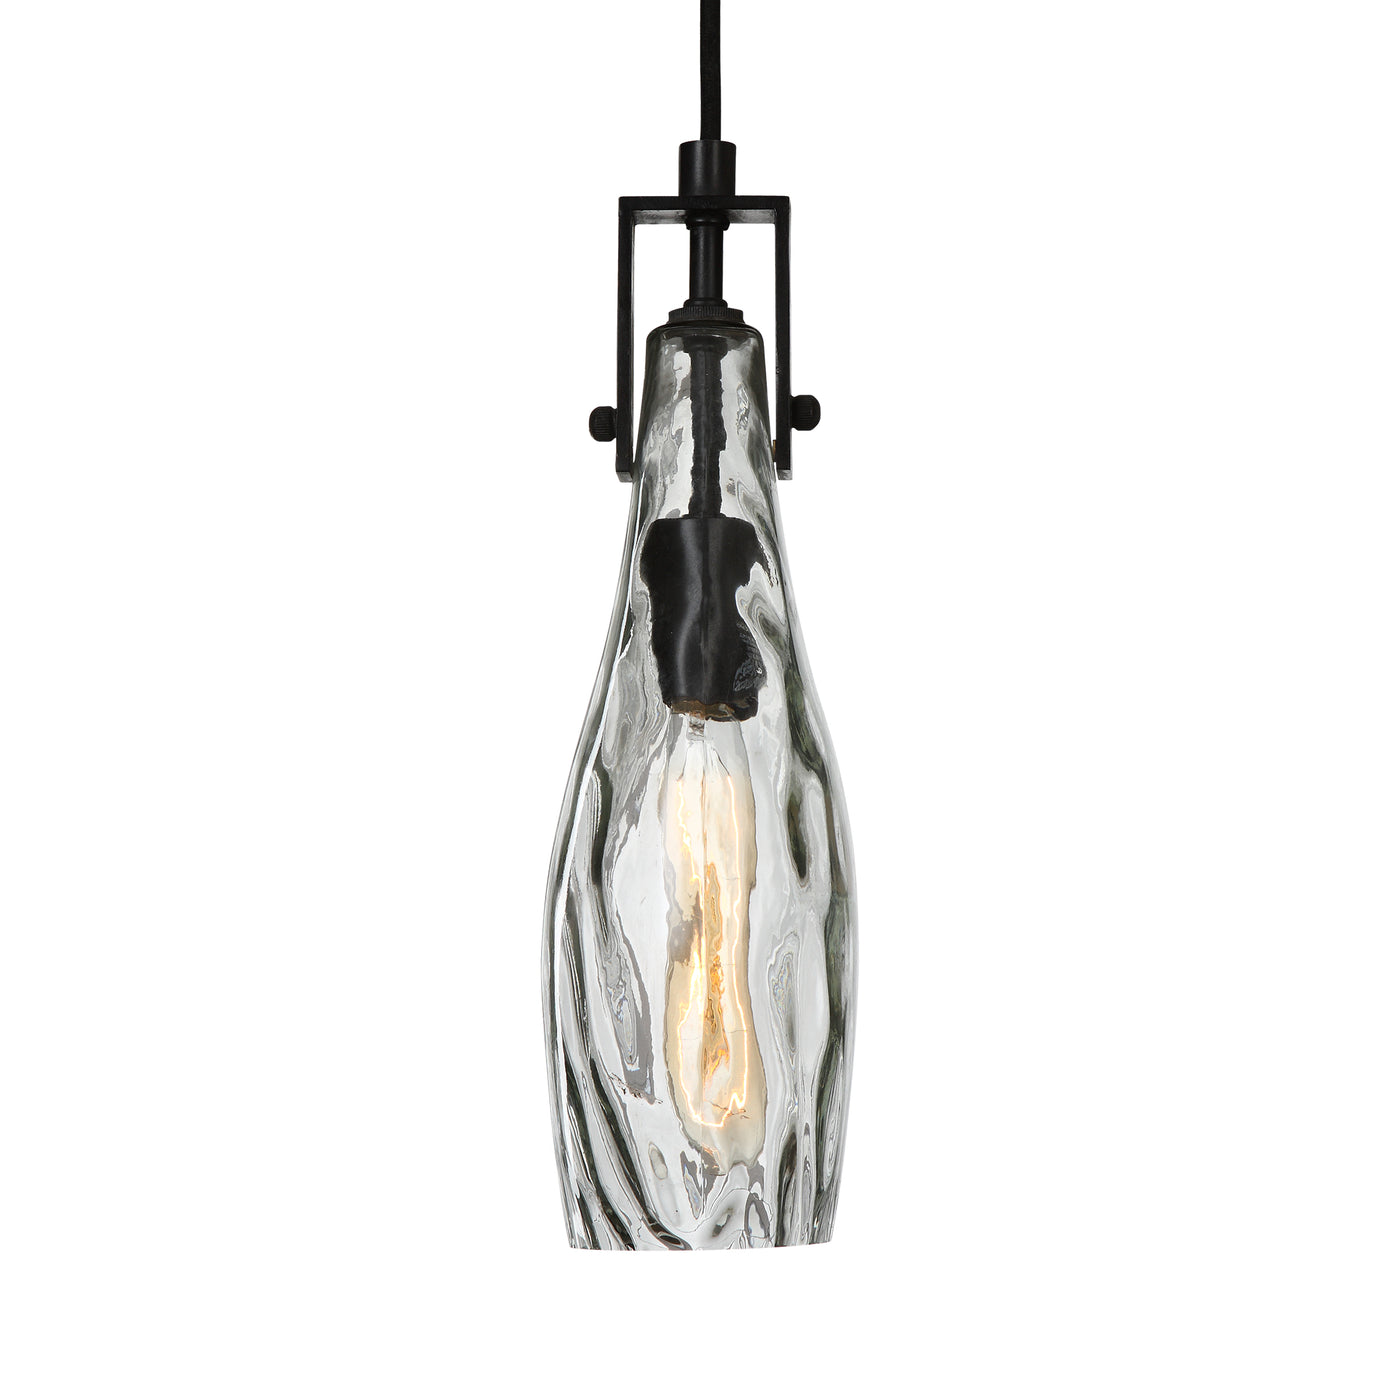 Transitional Pendant In A Matte Black Finish With A Flat Clear Teardrop-shaped Watered Glass. From The Front View, It Is A...